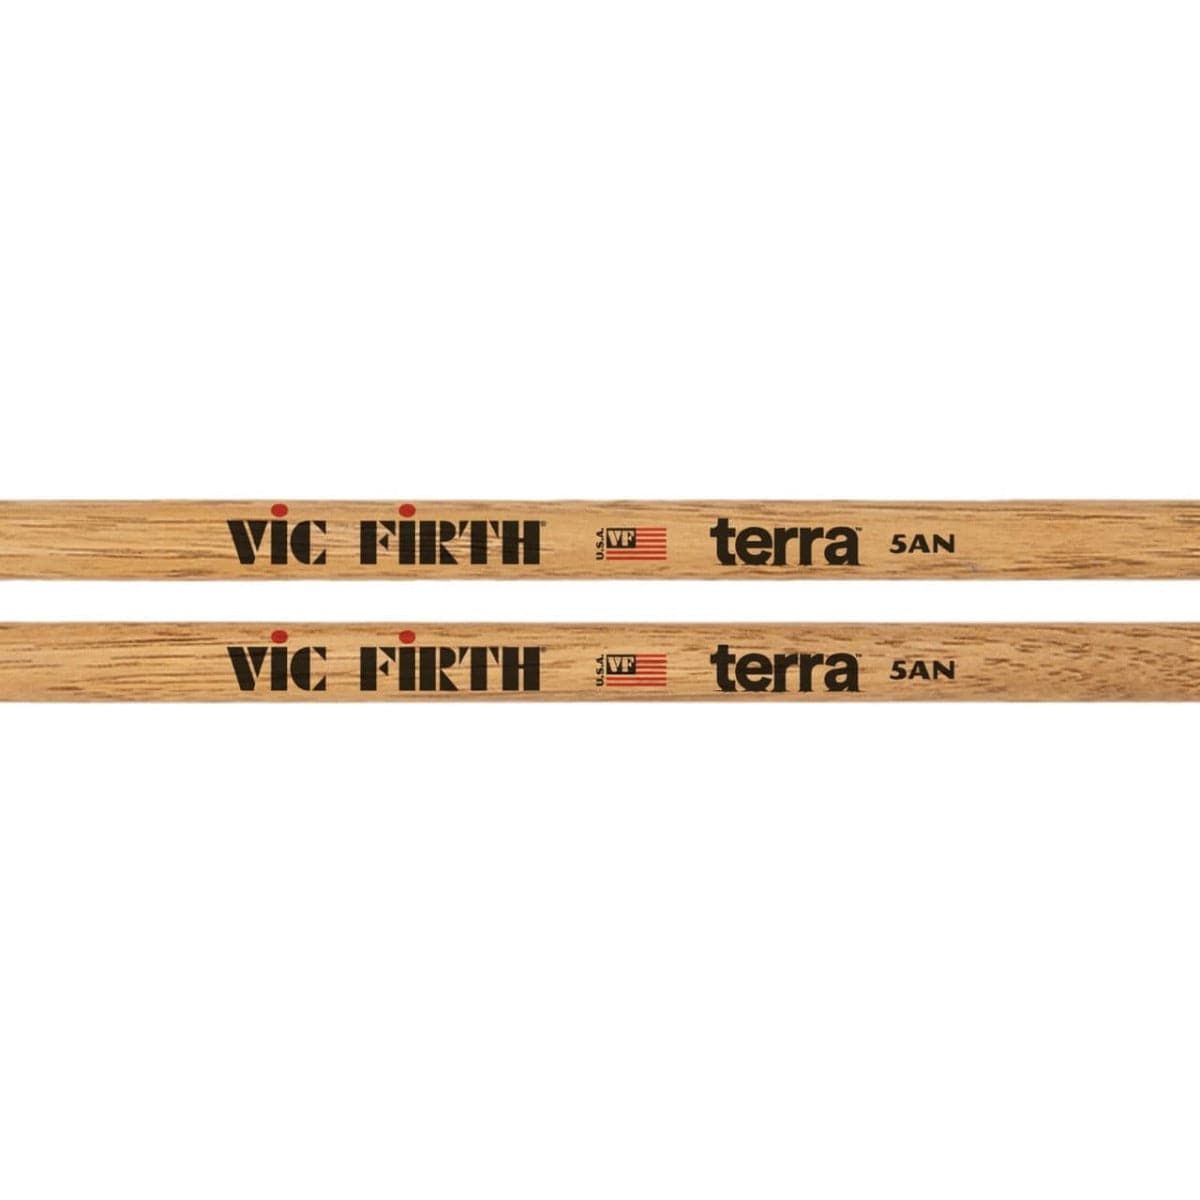 Terra　Tip　Nylon　Drum　5ATN　Vic　Portsmouth　Drumsticks,　American　Series　Firth　Classic　Of　–　Center